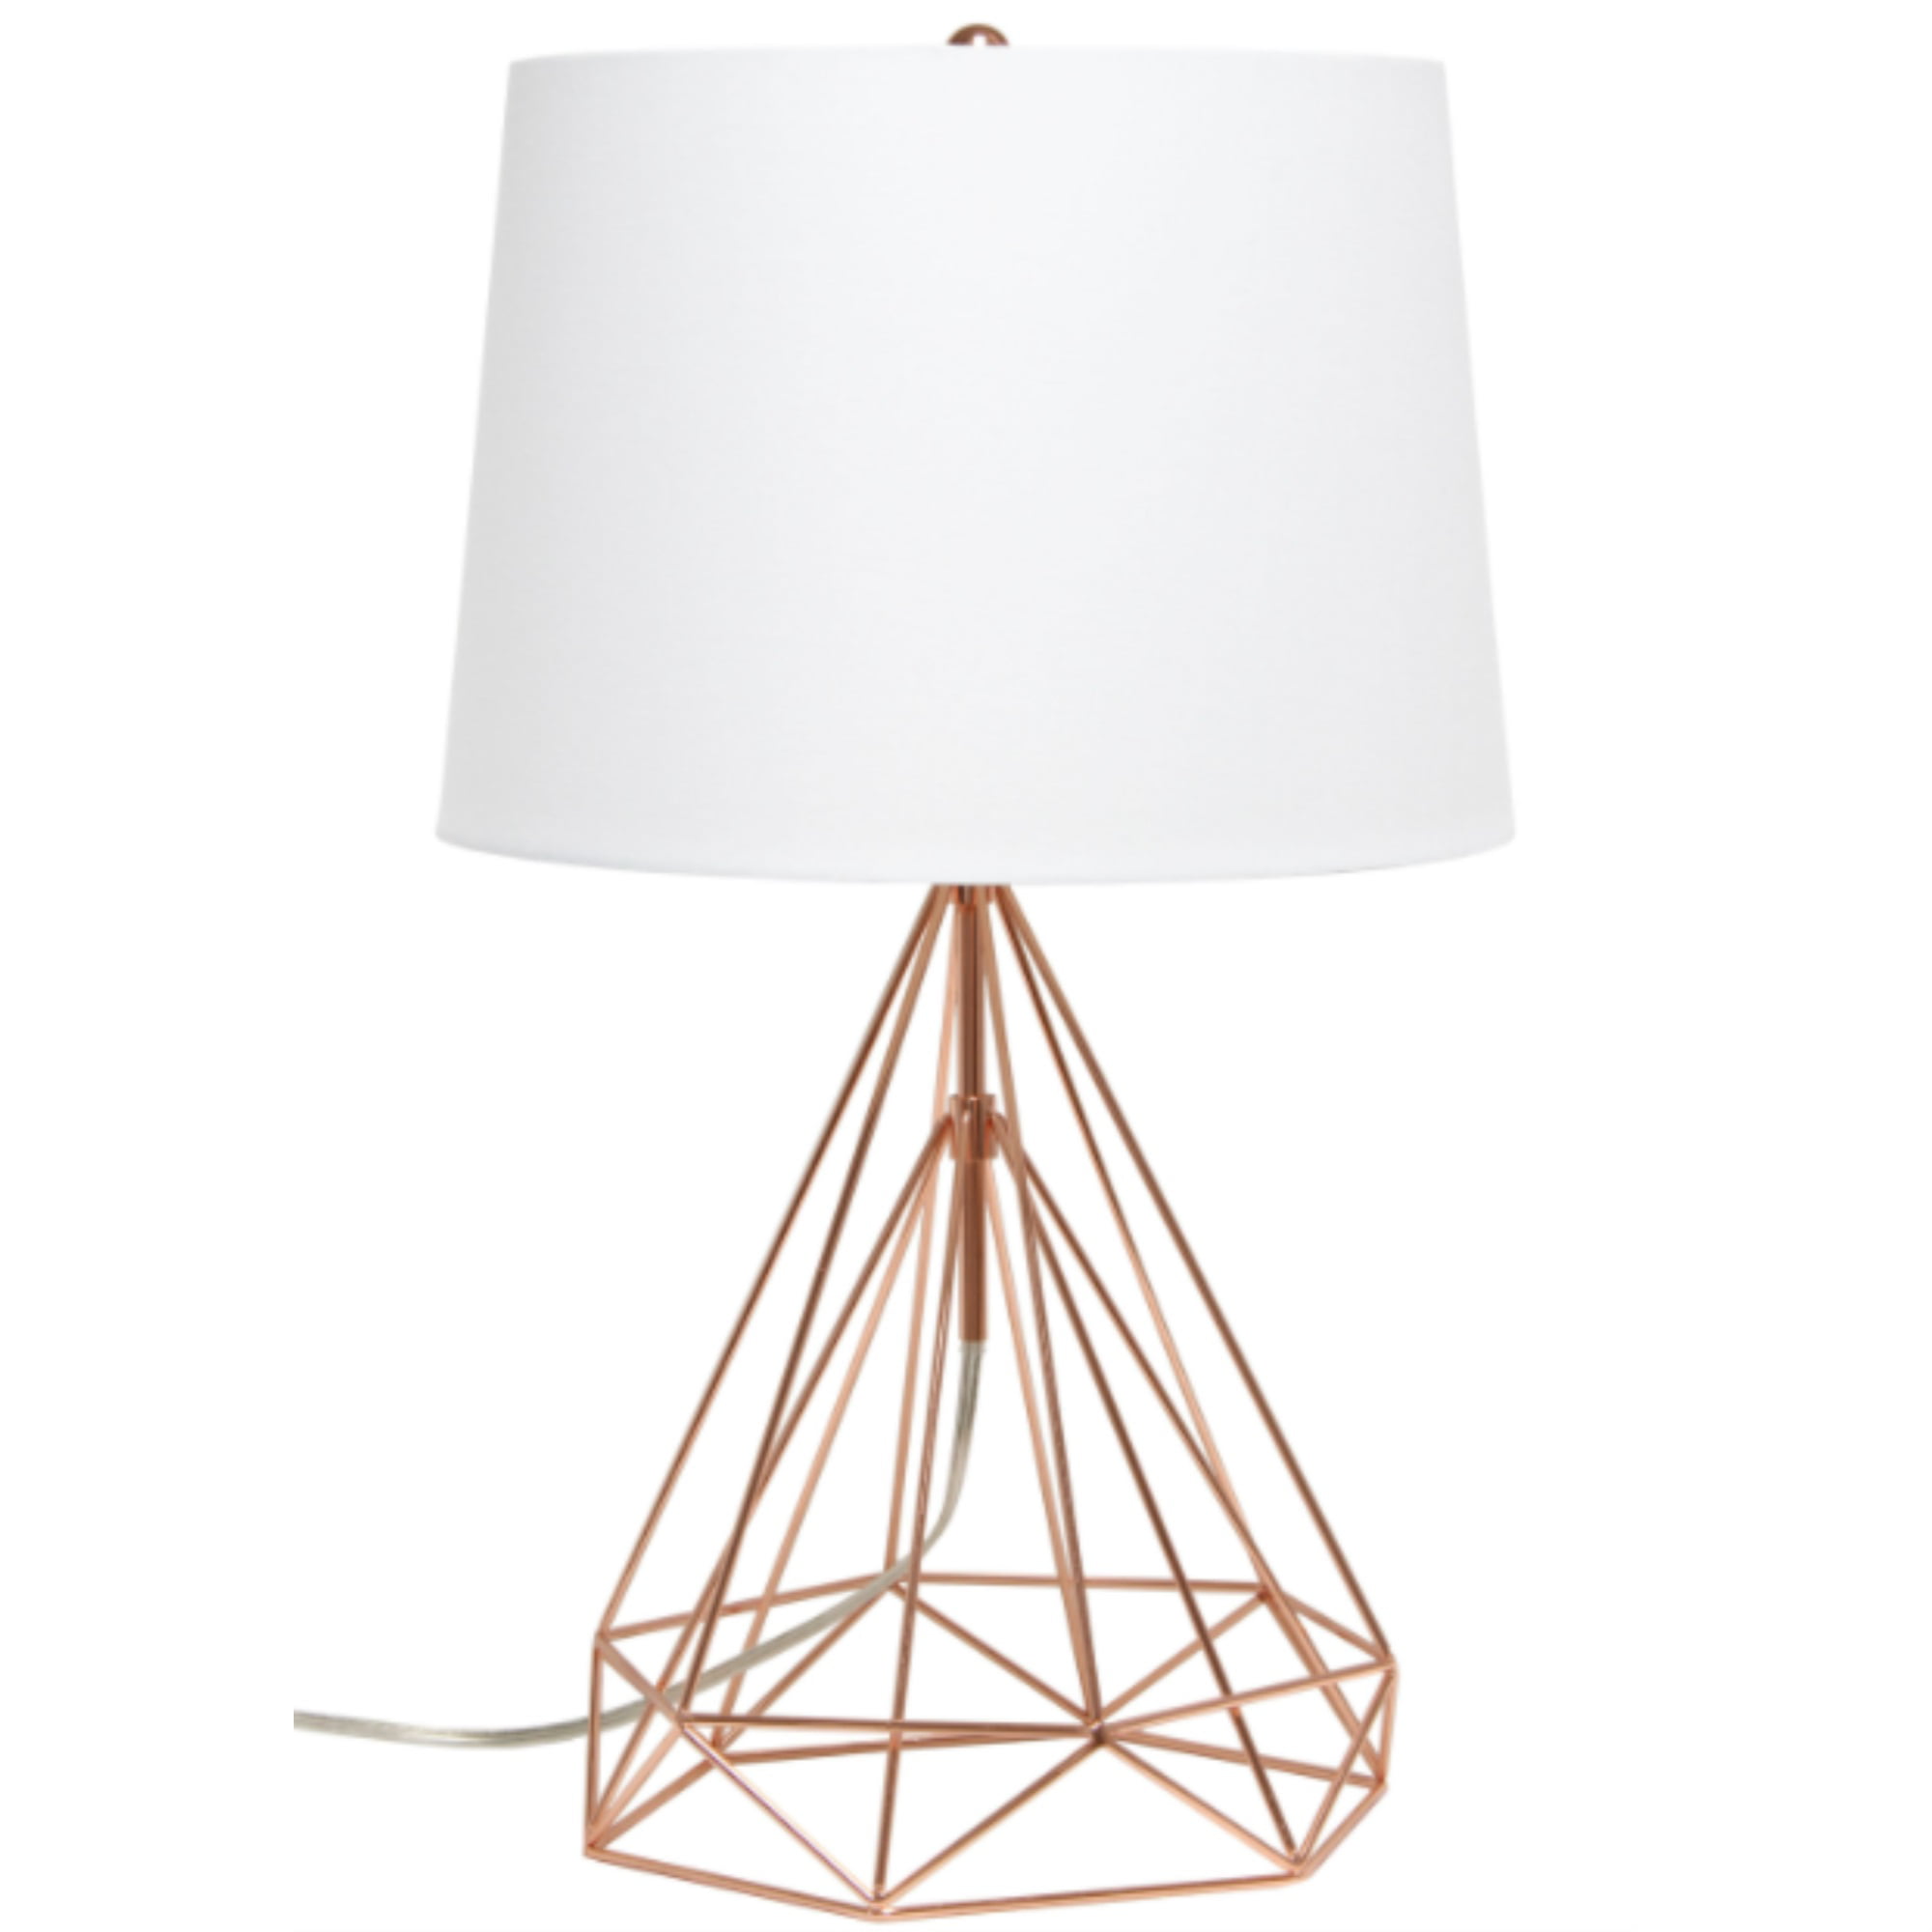 Lalia Home Geometric White Matte Wired Table Lamp with Fabric Shade